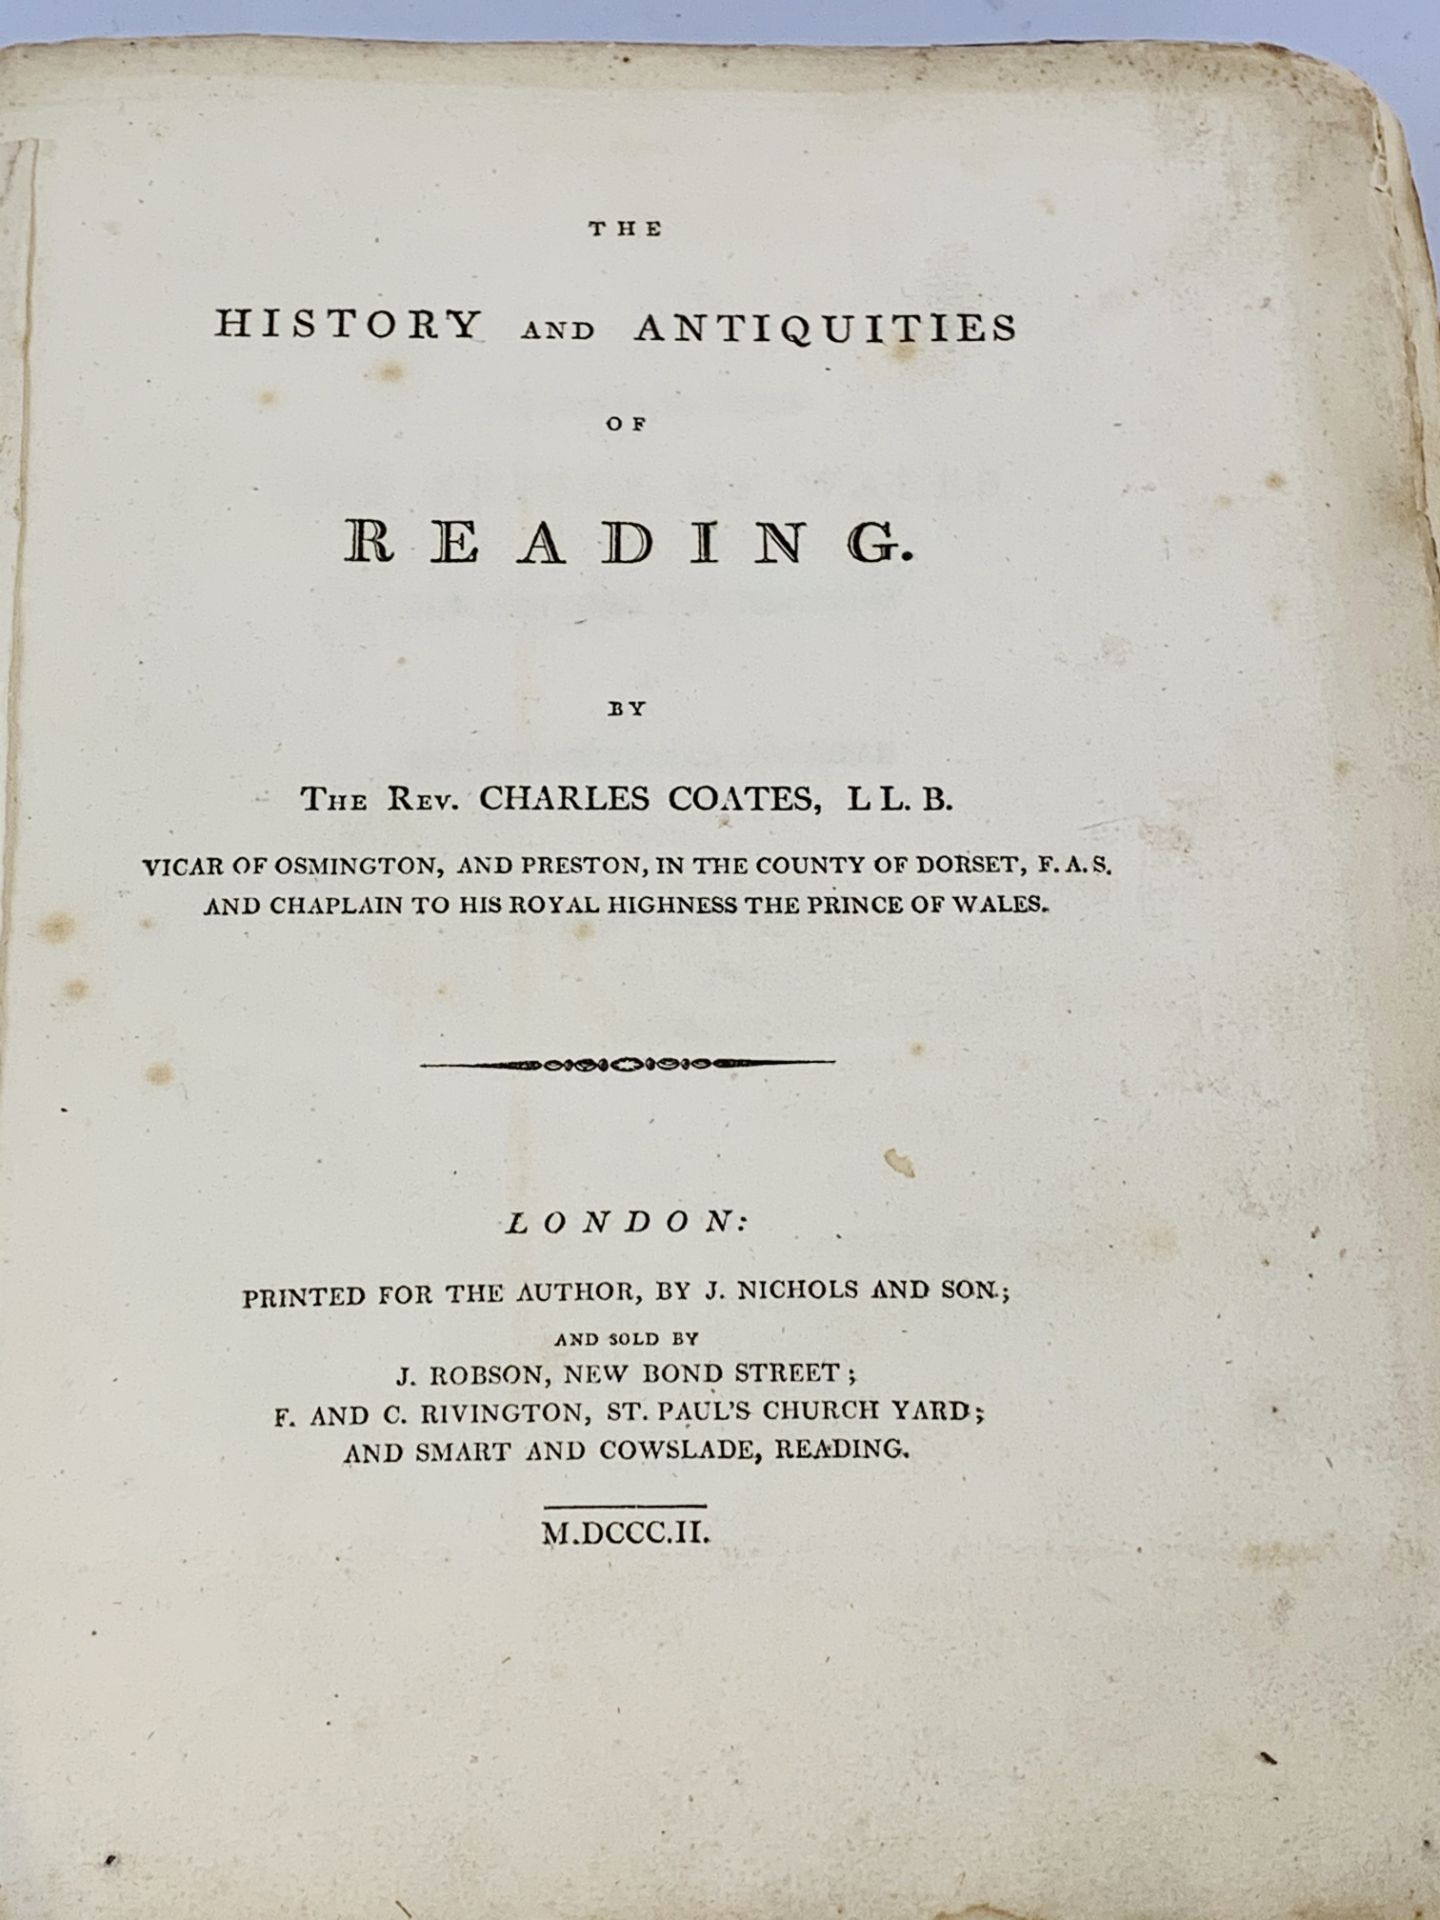 An original copy of The History and Antiquites of Reading, by Rev. Coates, published 1802 - Image 2 of 5